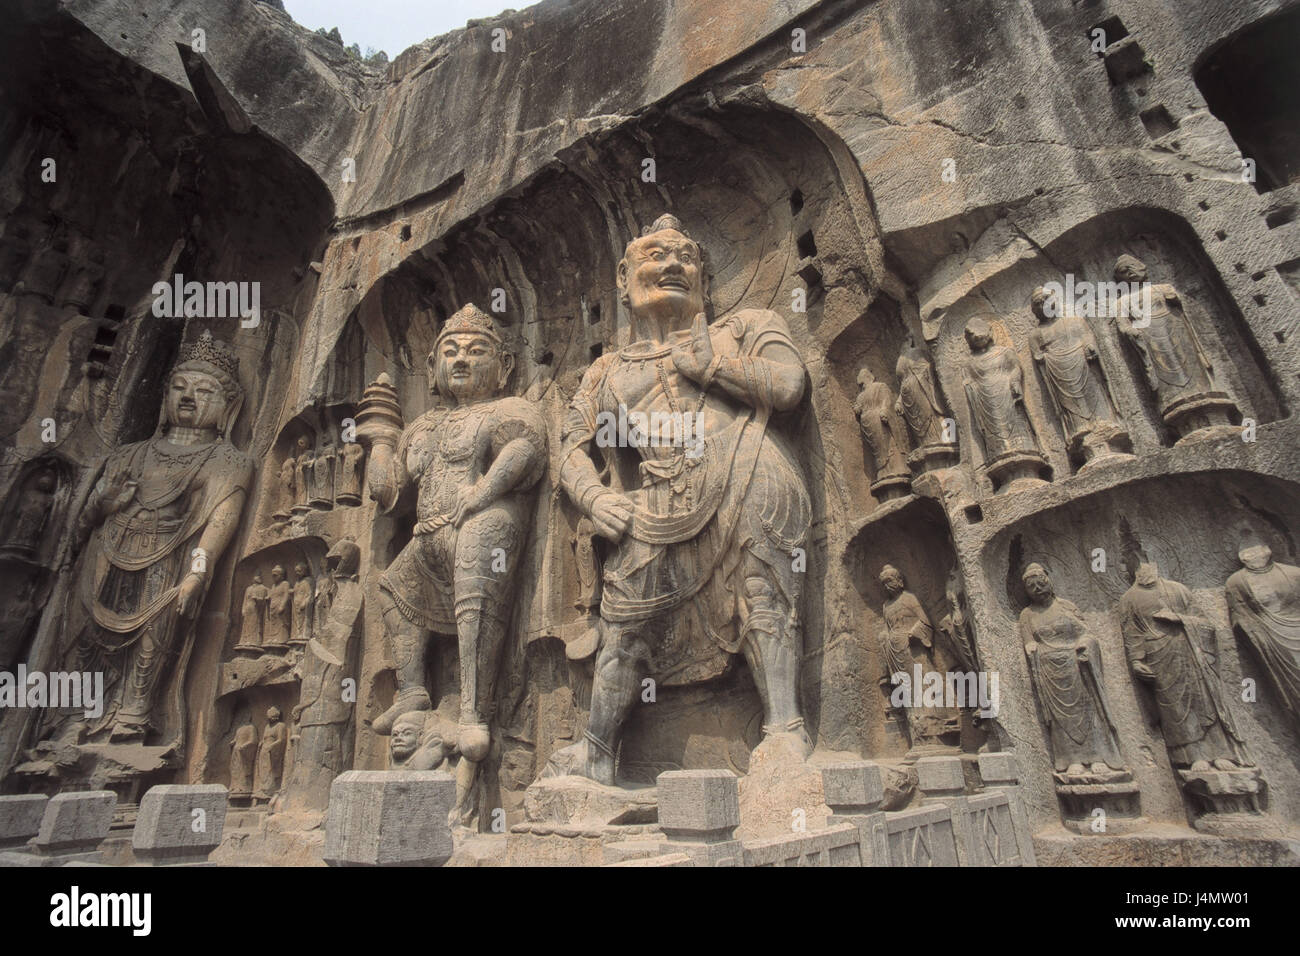 China, Henan Sheng, Luoyang, Longmen grottos, rock tombs, statues Asia, Eastern Asia, island state, Zhonghua Renmin Gongheguo, Lojang, Loyang, dragon's goal grottos, Longmengrotten, Longmen grottos, Hölentempel, cultural-historical structure, culture, architecture, sculpture, art, place of interest, daemons, awake characters Stock Photo